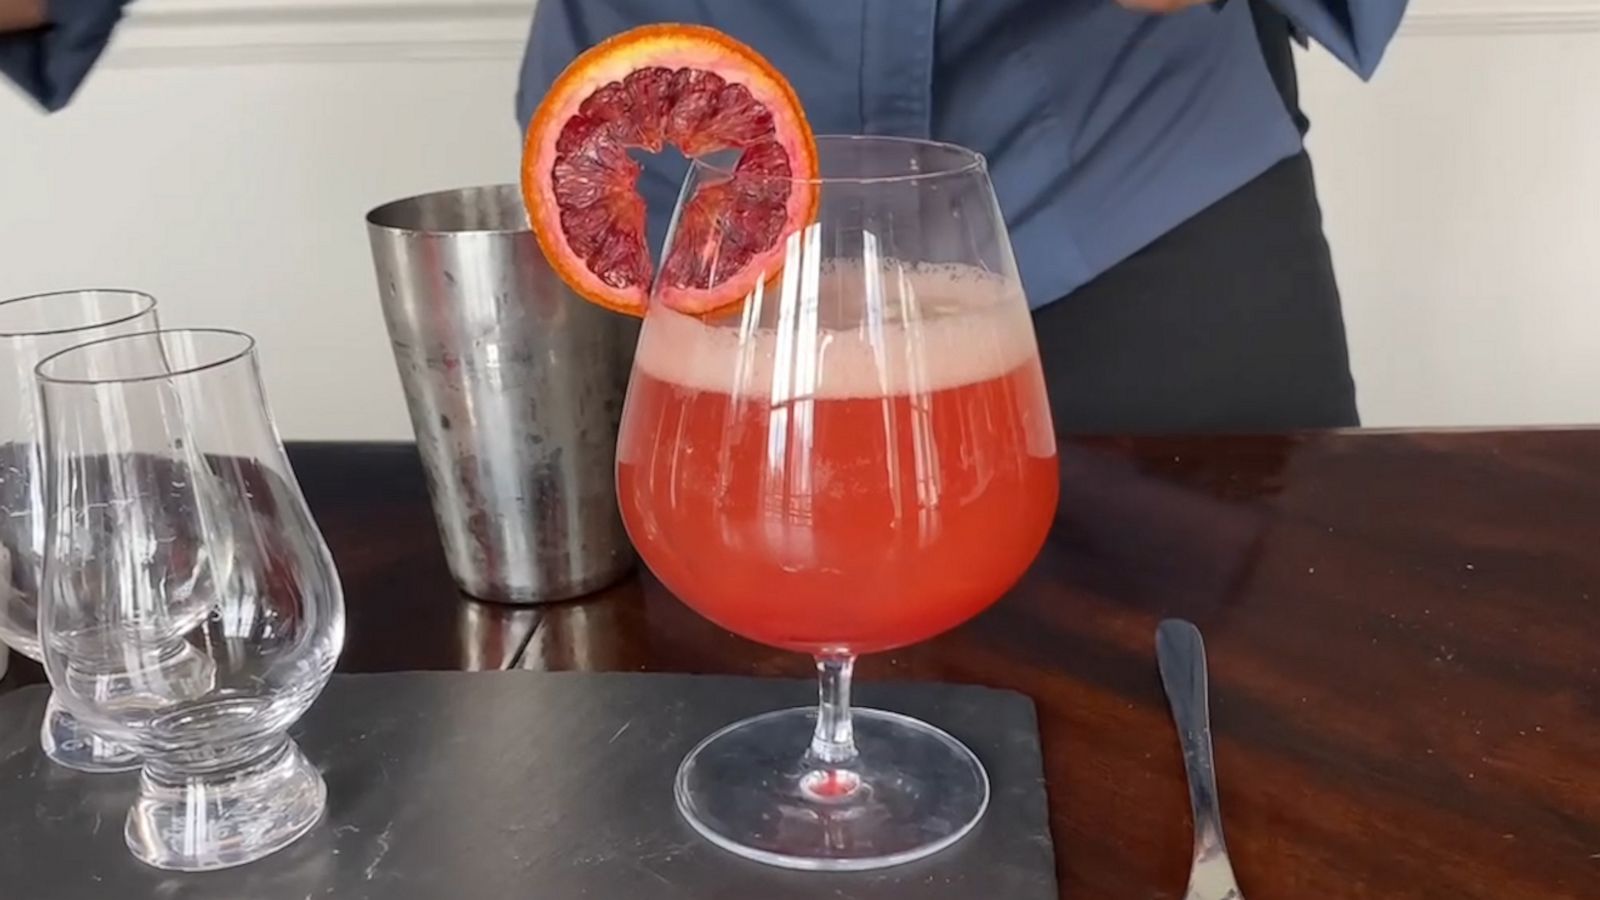 VIDEO: Celebrate spring early with this Valentine’s Day Aperol Spritz float